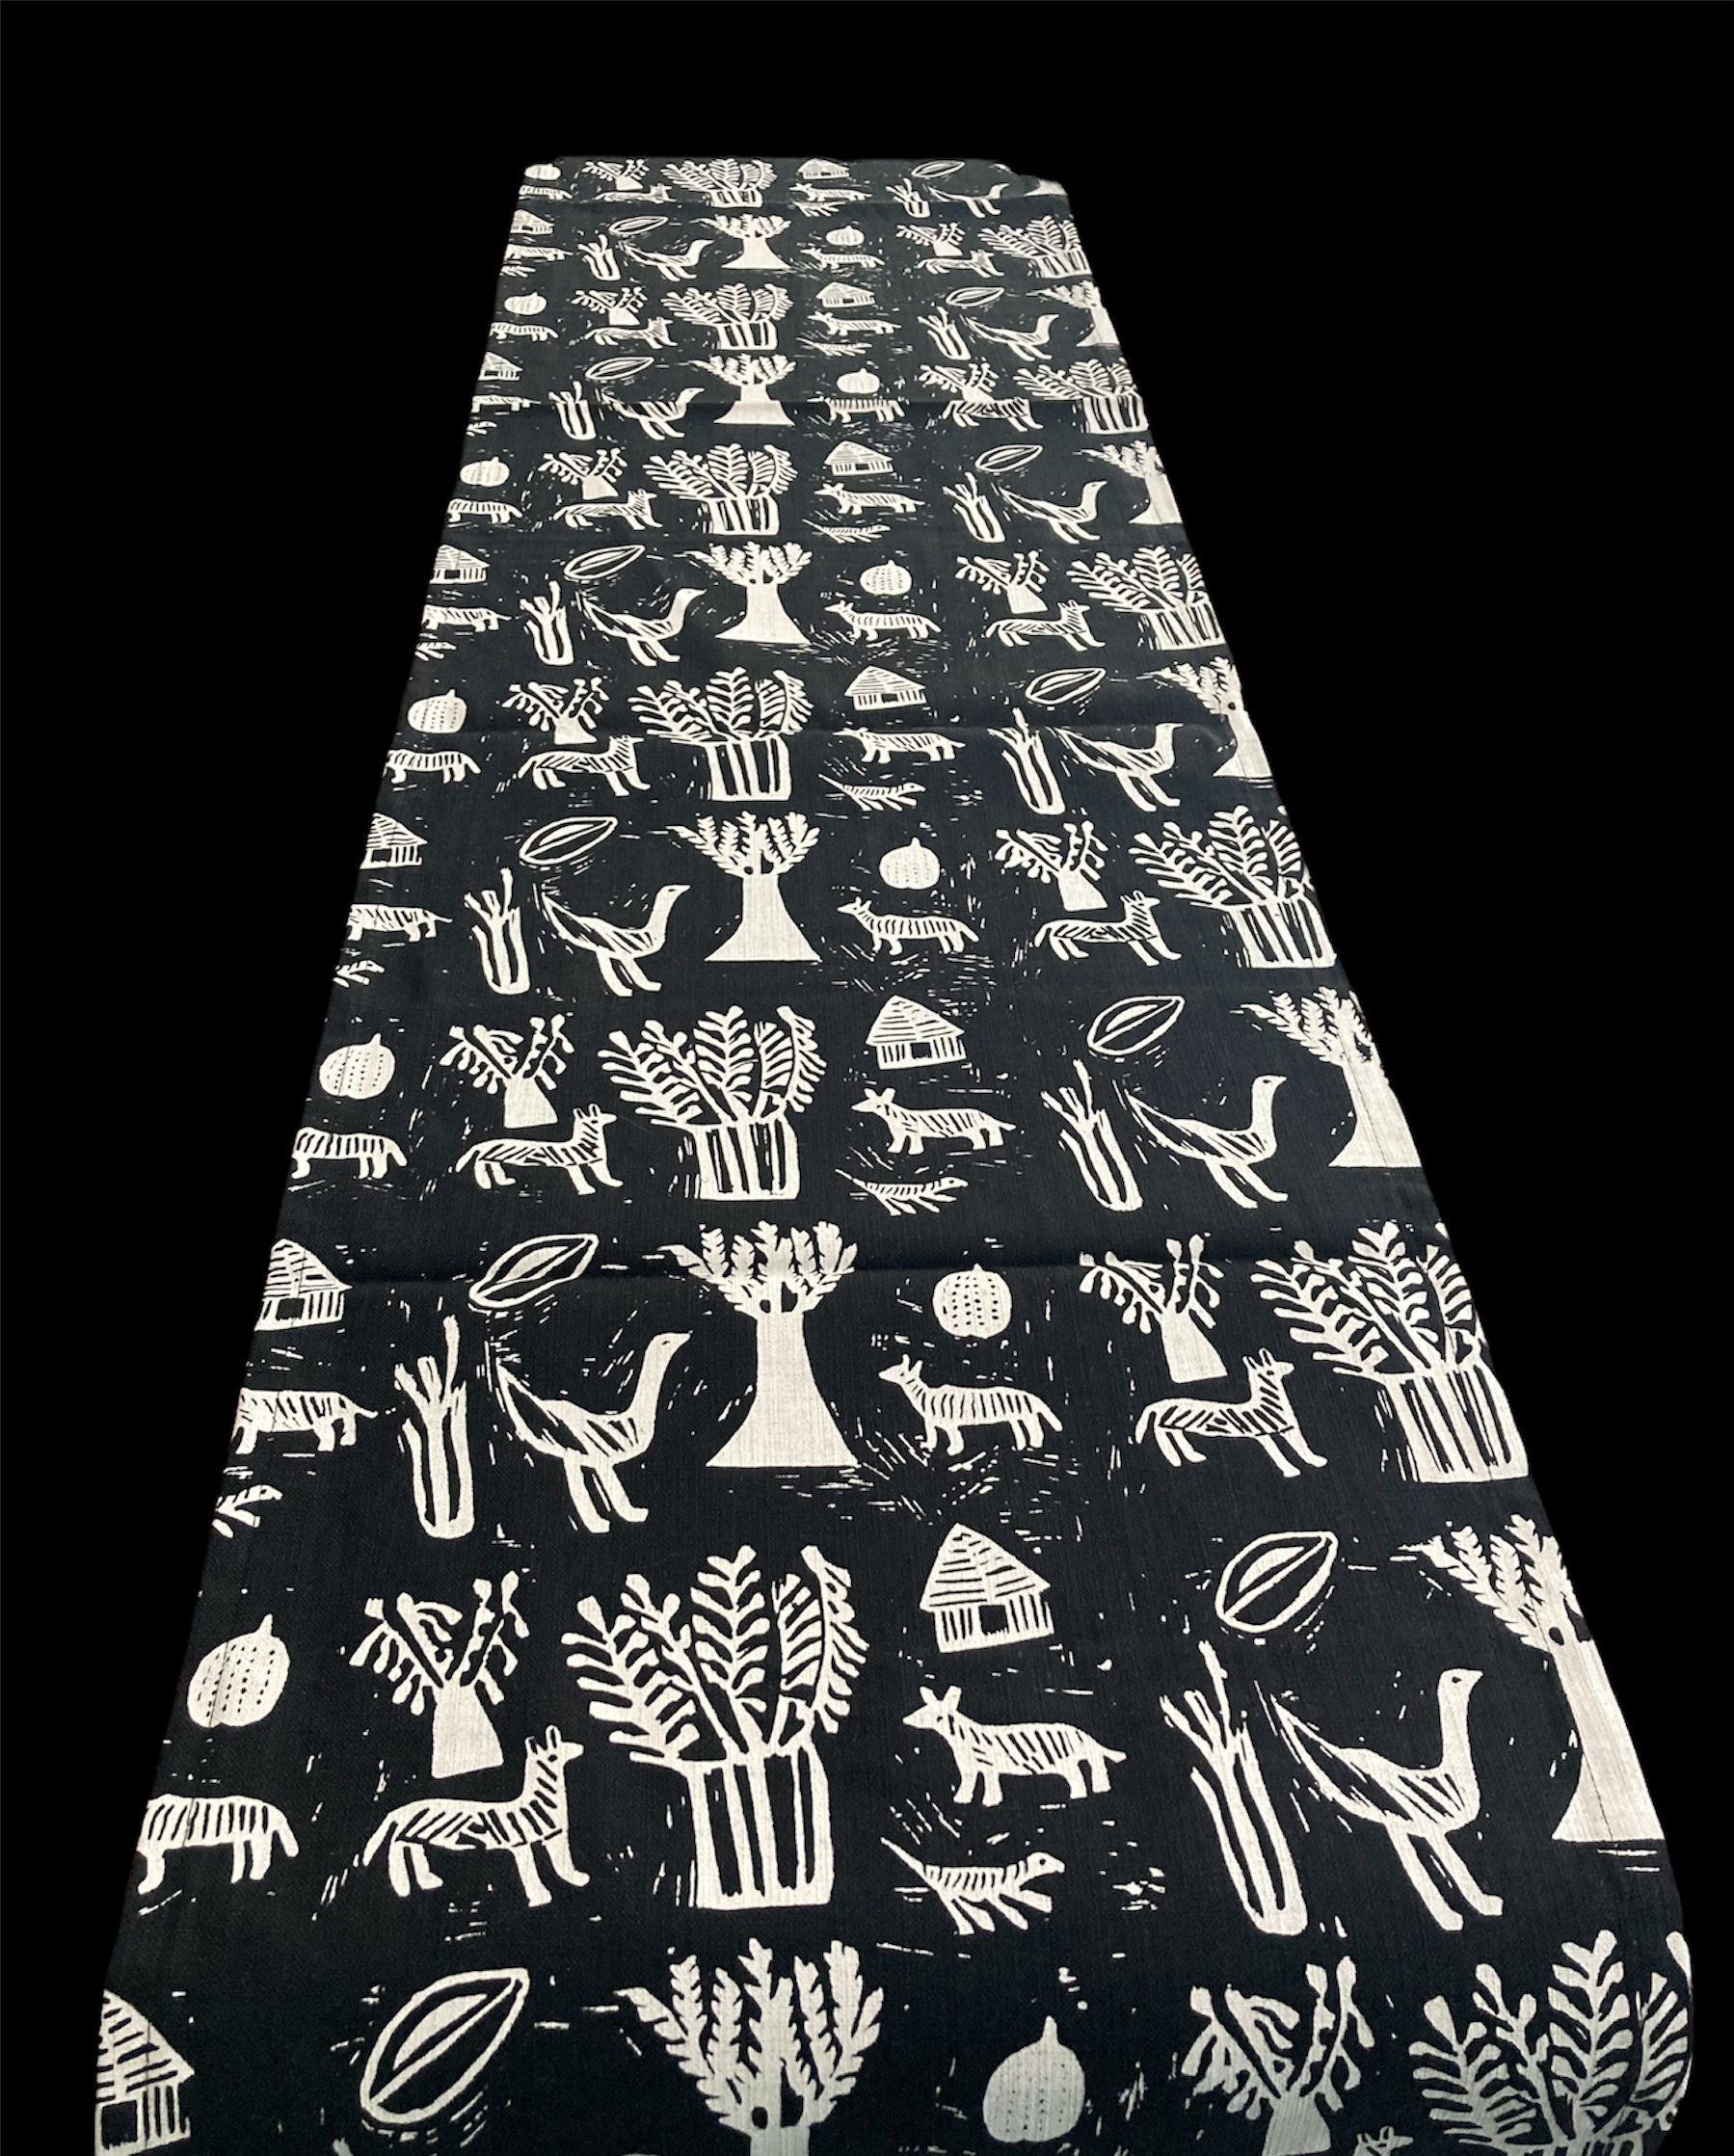 100% cotton Table Runner 96" x 16" from Namibia - Design wb05l